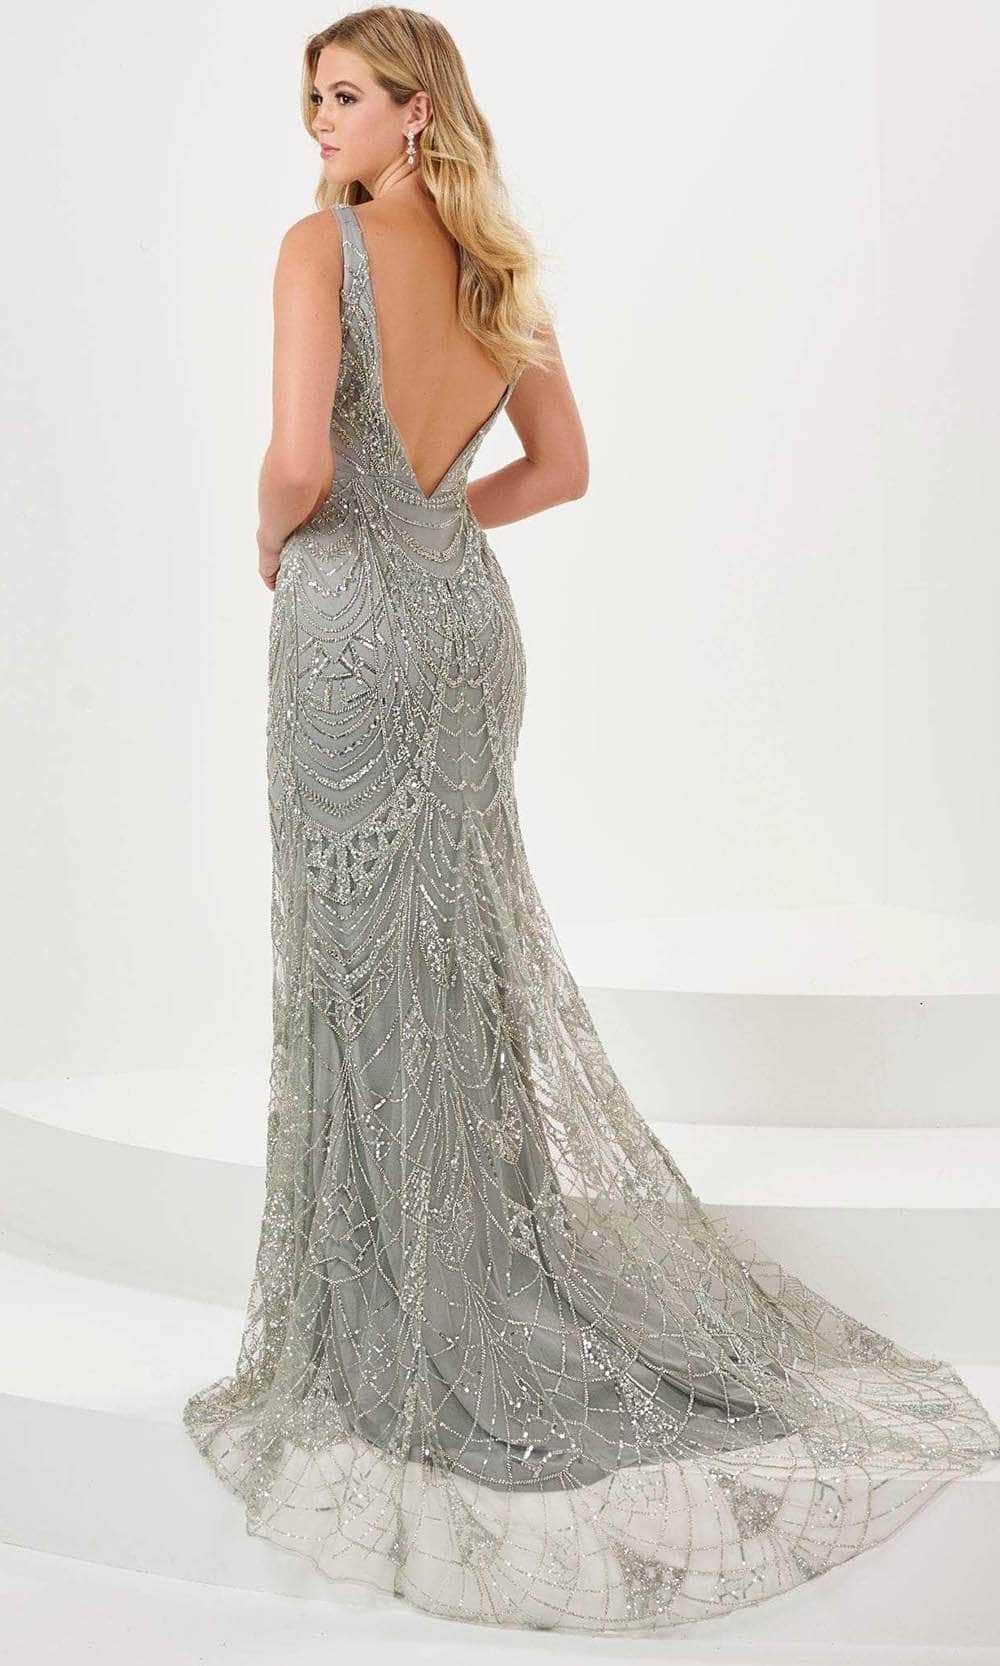 Panoply, Panoply 14192 - Plunging Embellished Evening Gown